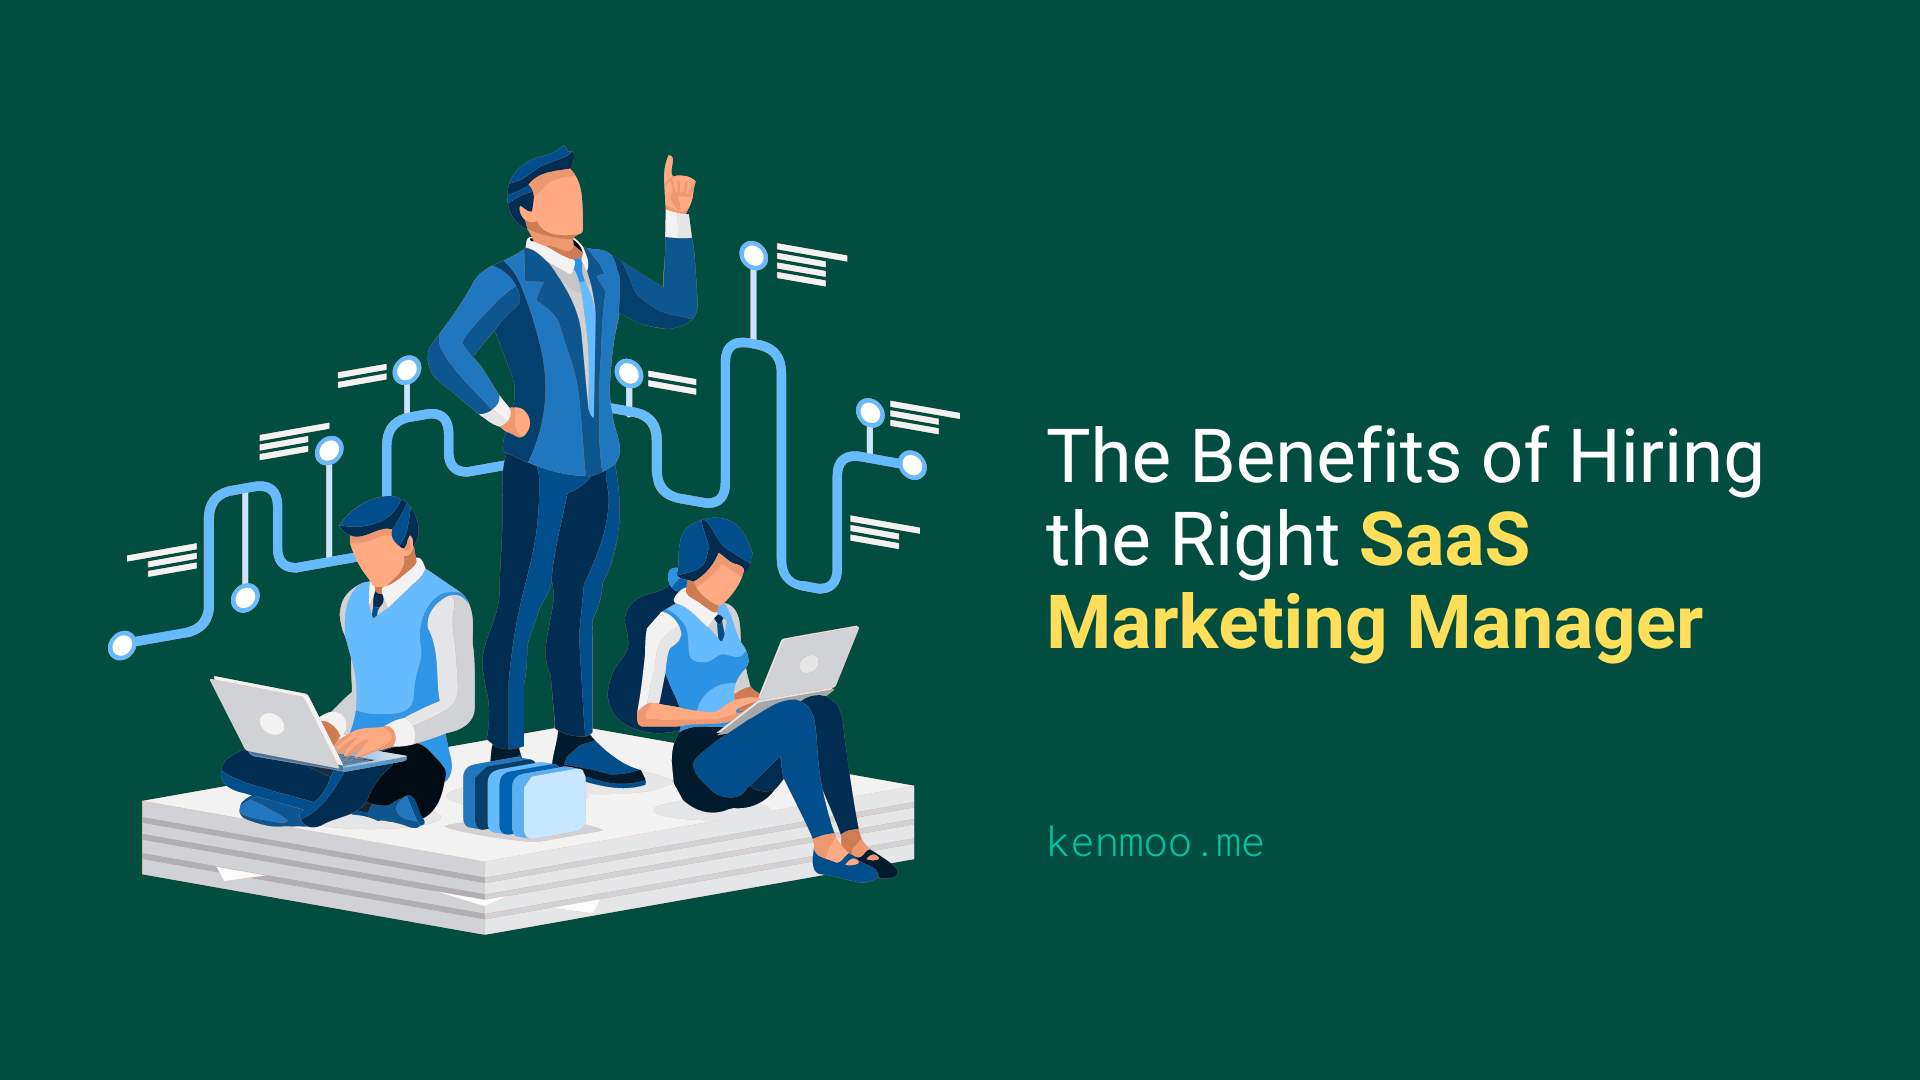 The Benefits of Hiring the Right SaaS Marketing Manager